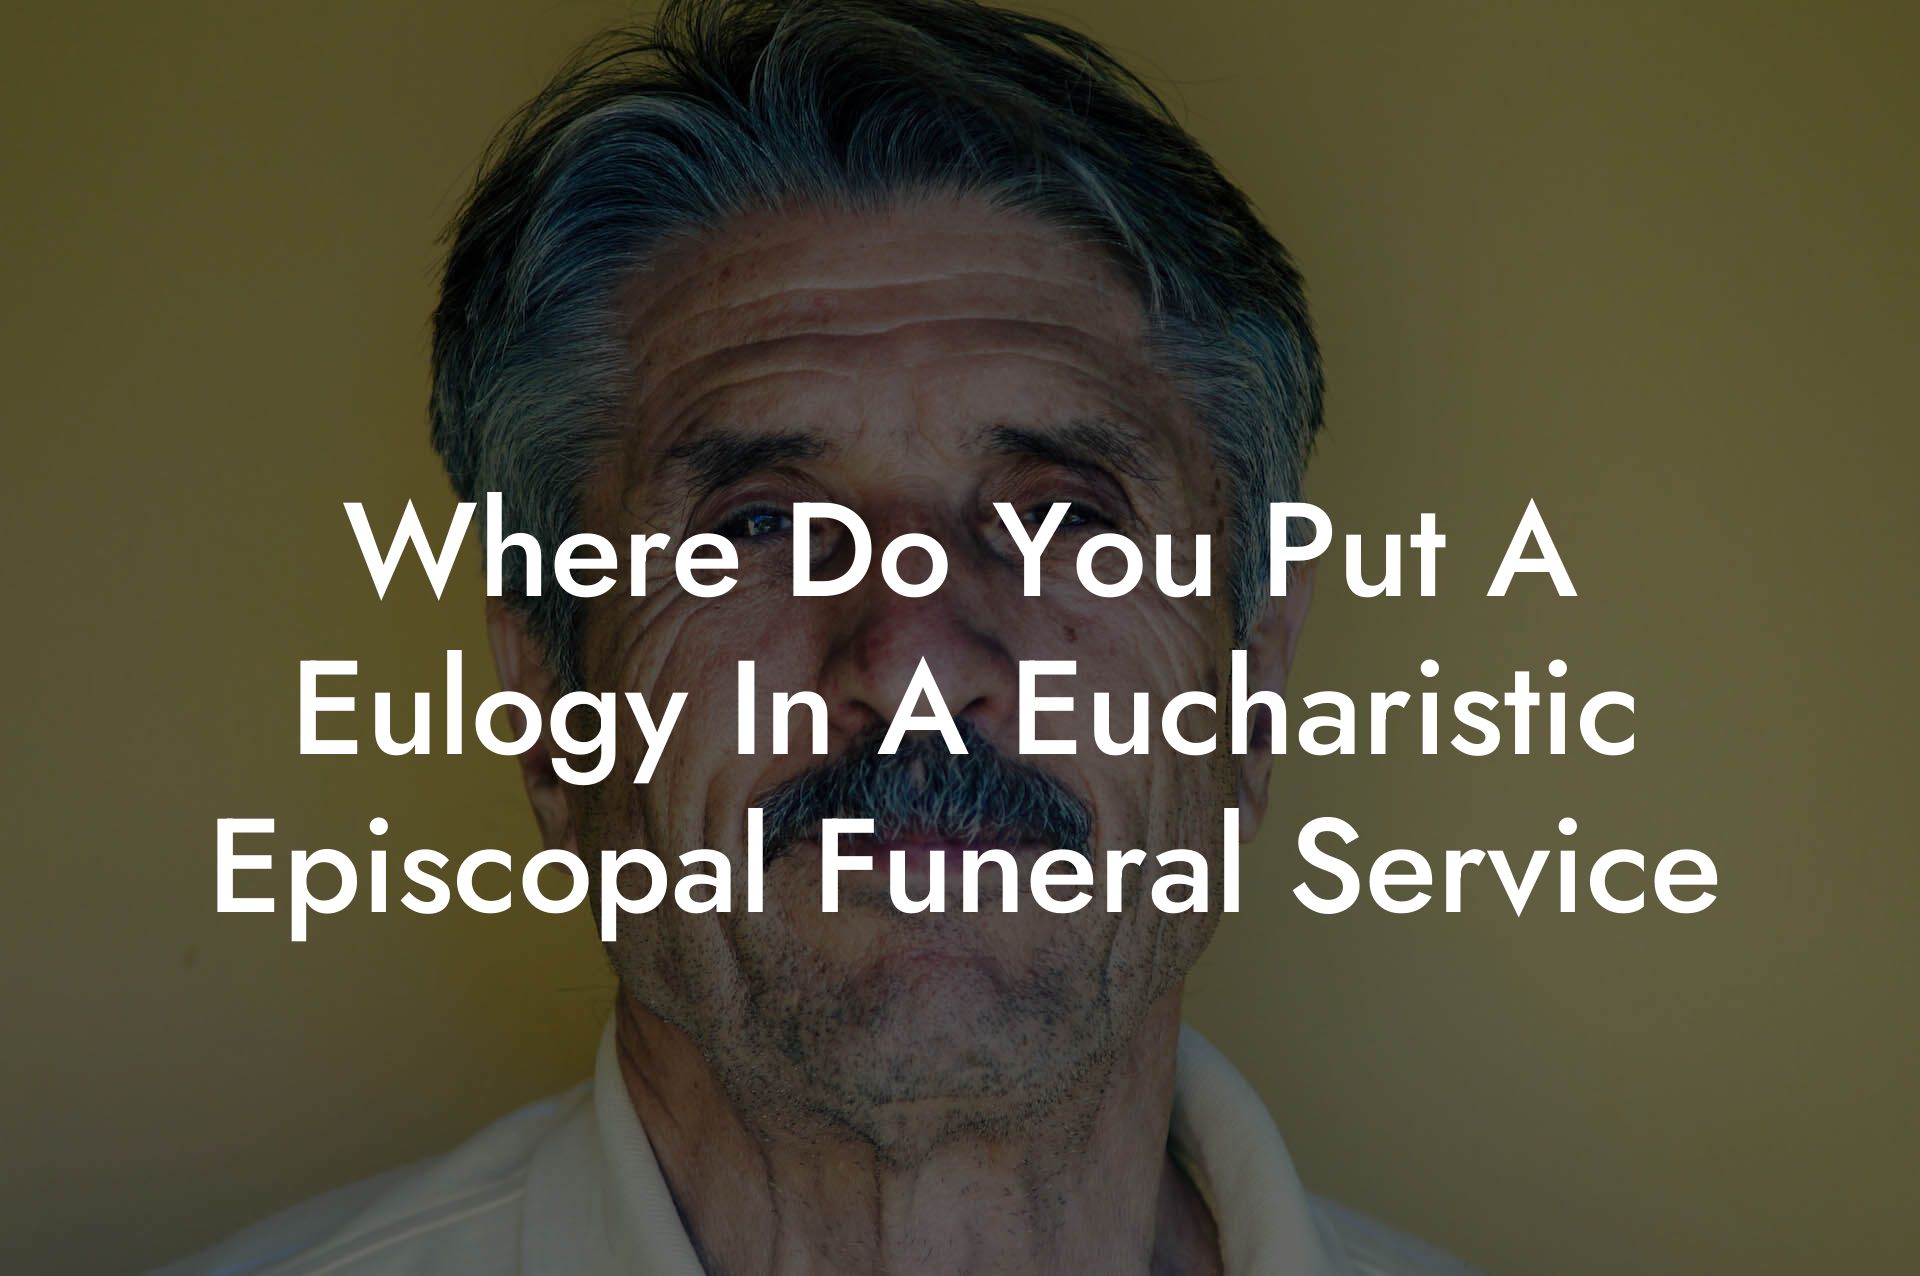 Where Do You Put A Eulogy In A Eucharistic Episcopal Funeral Service